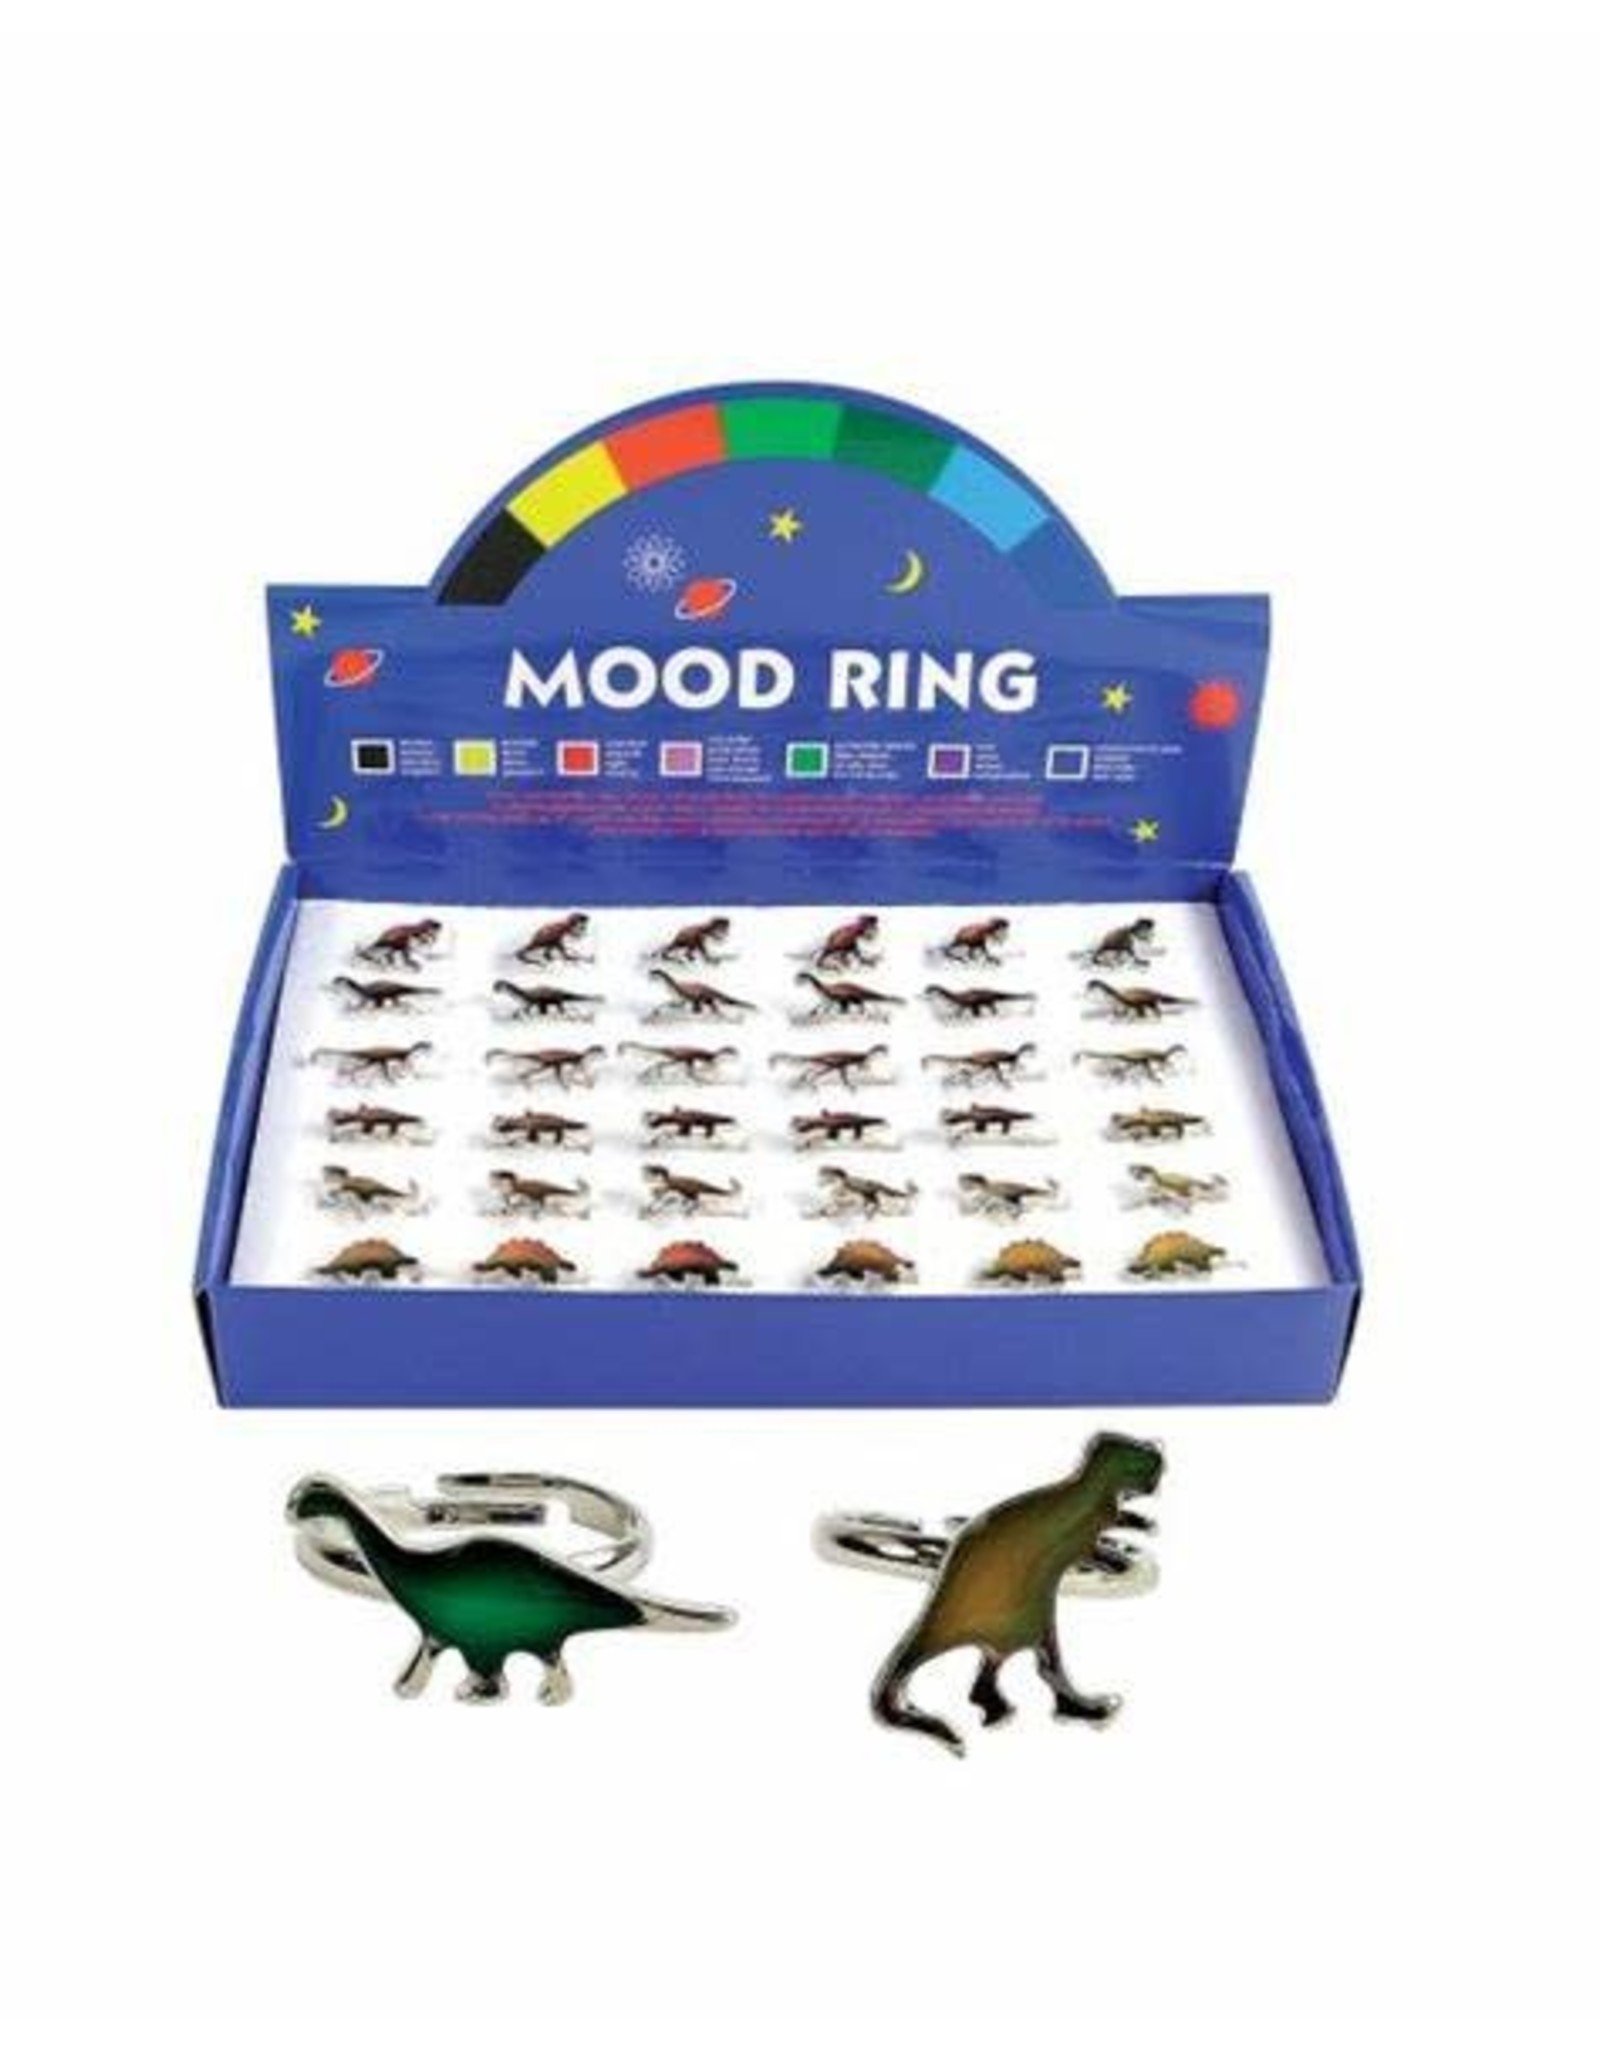 Dinosaur Mood Ring - Wit & Whimsy Toys